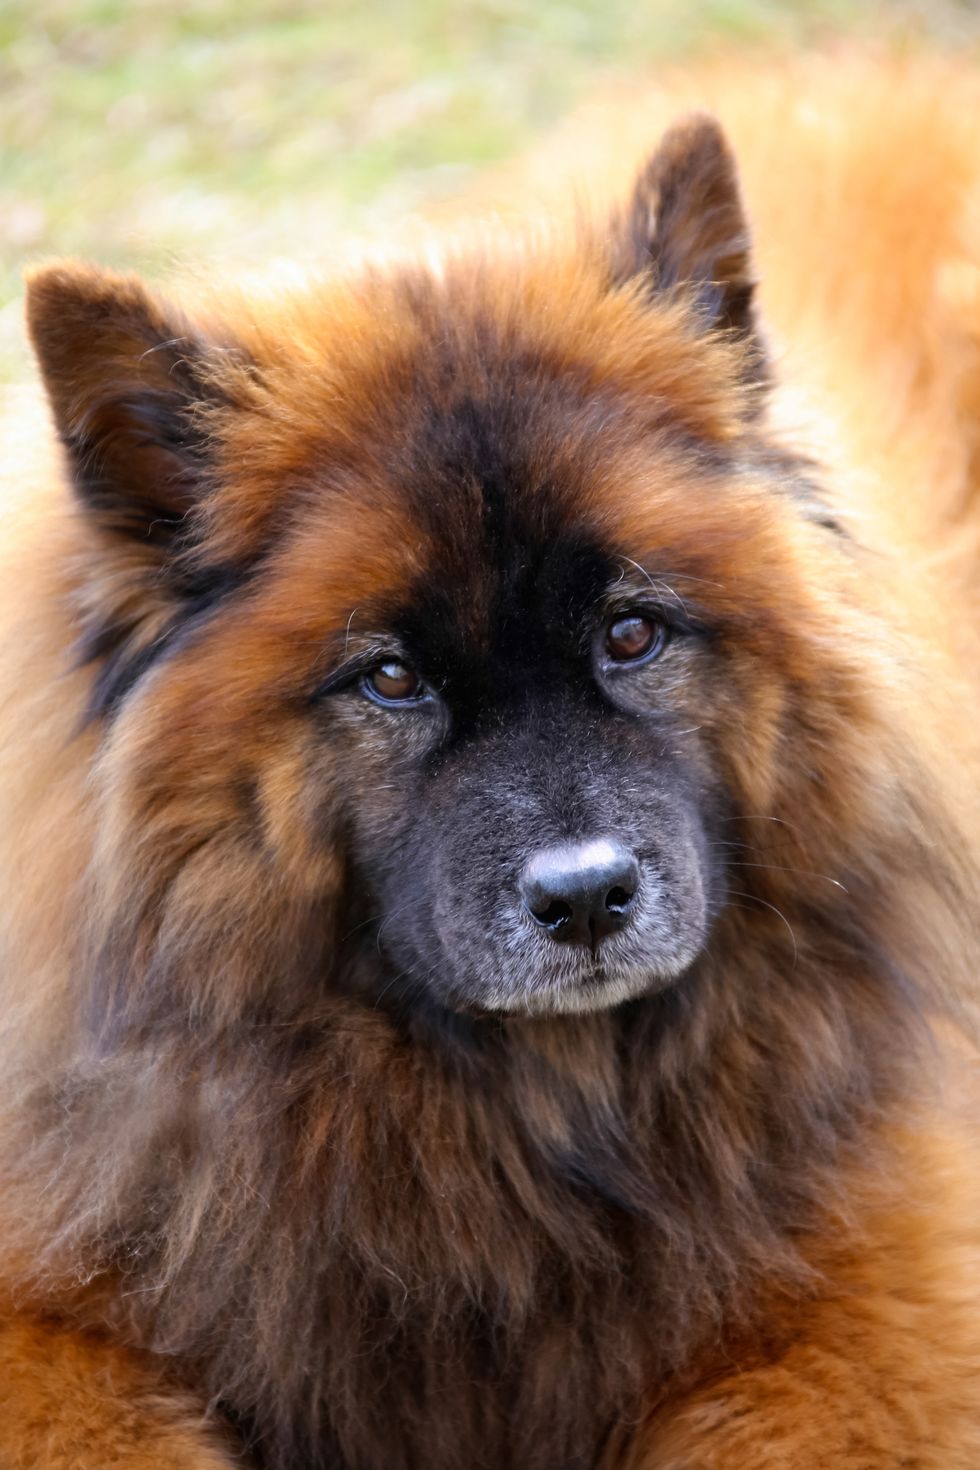 close up of very fluffy brown and black long haired dog with some white on his muzzle